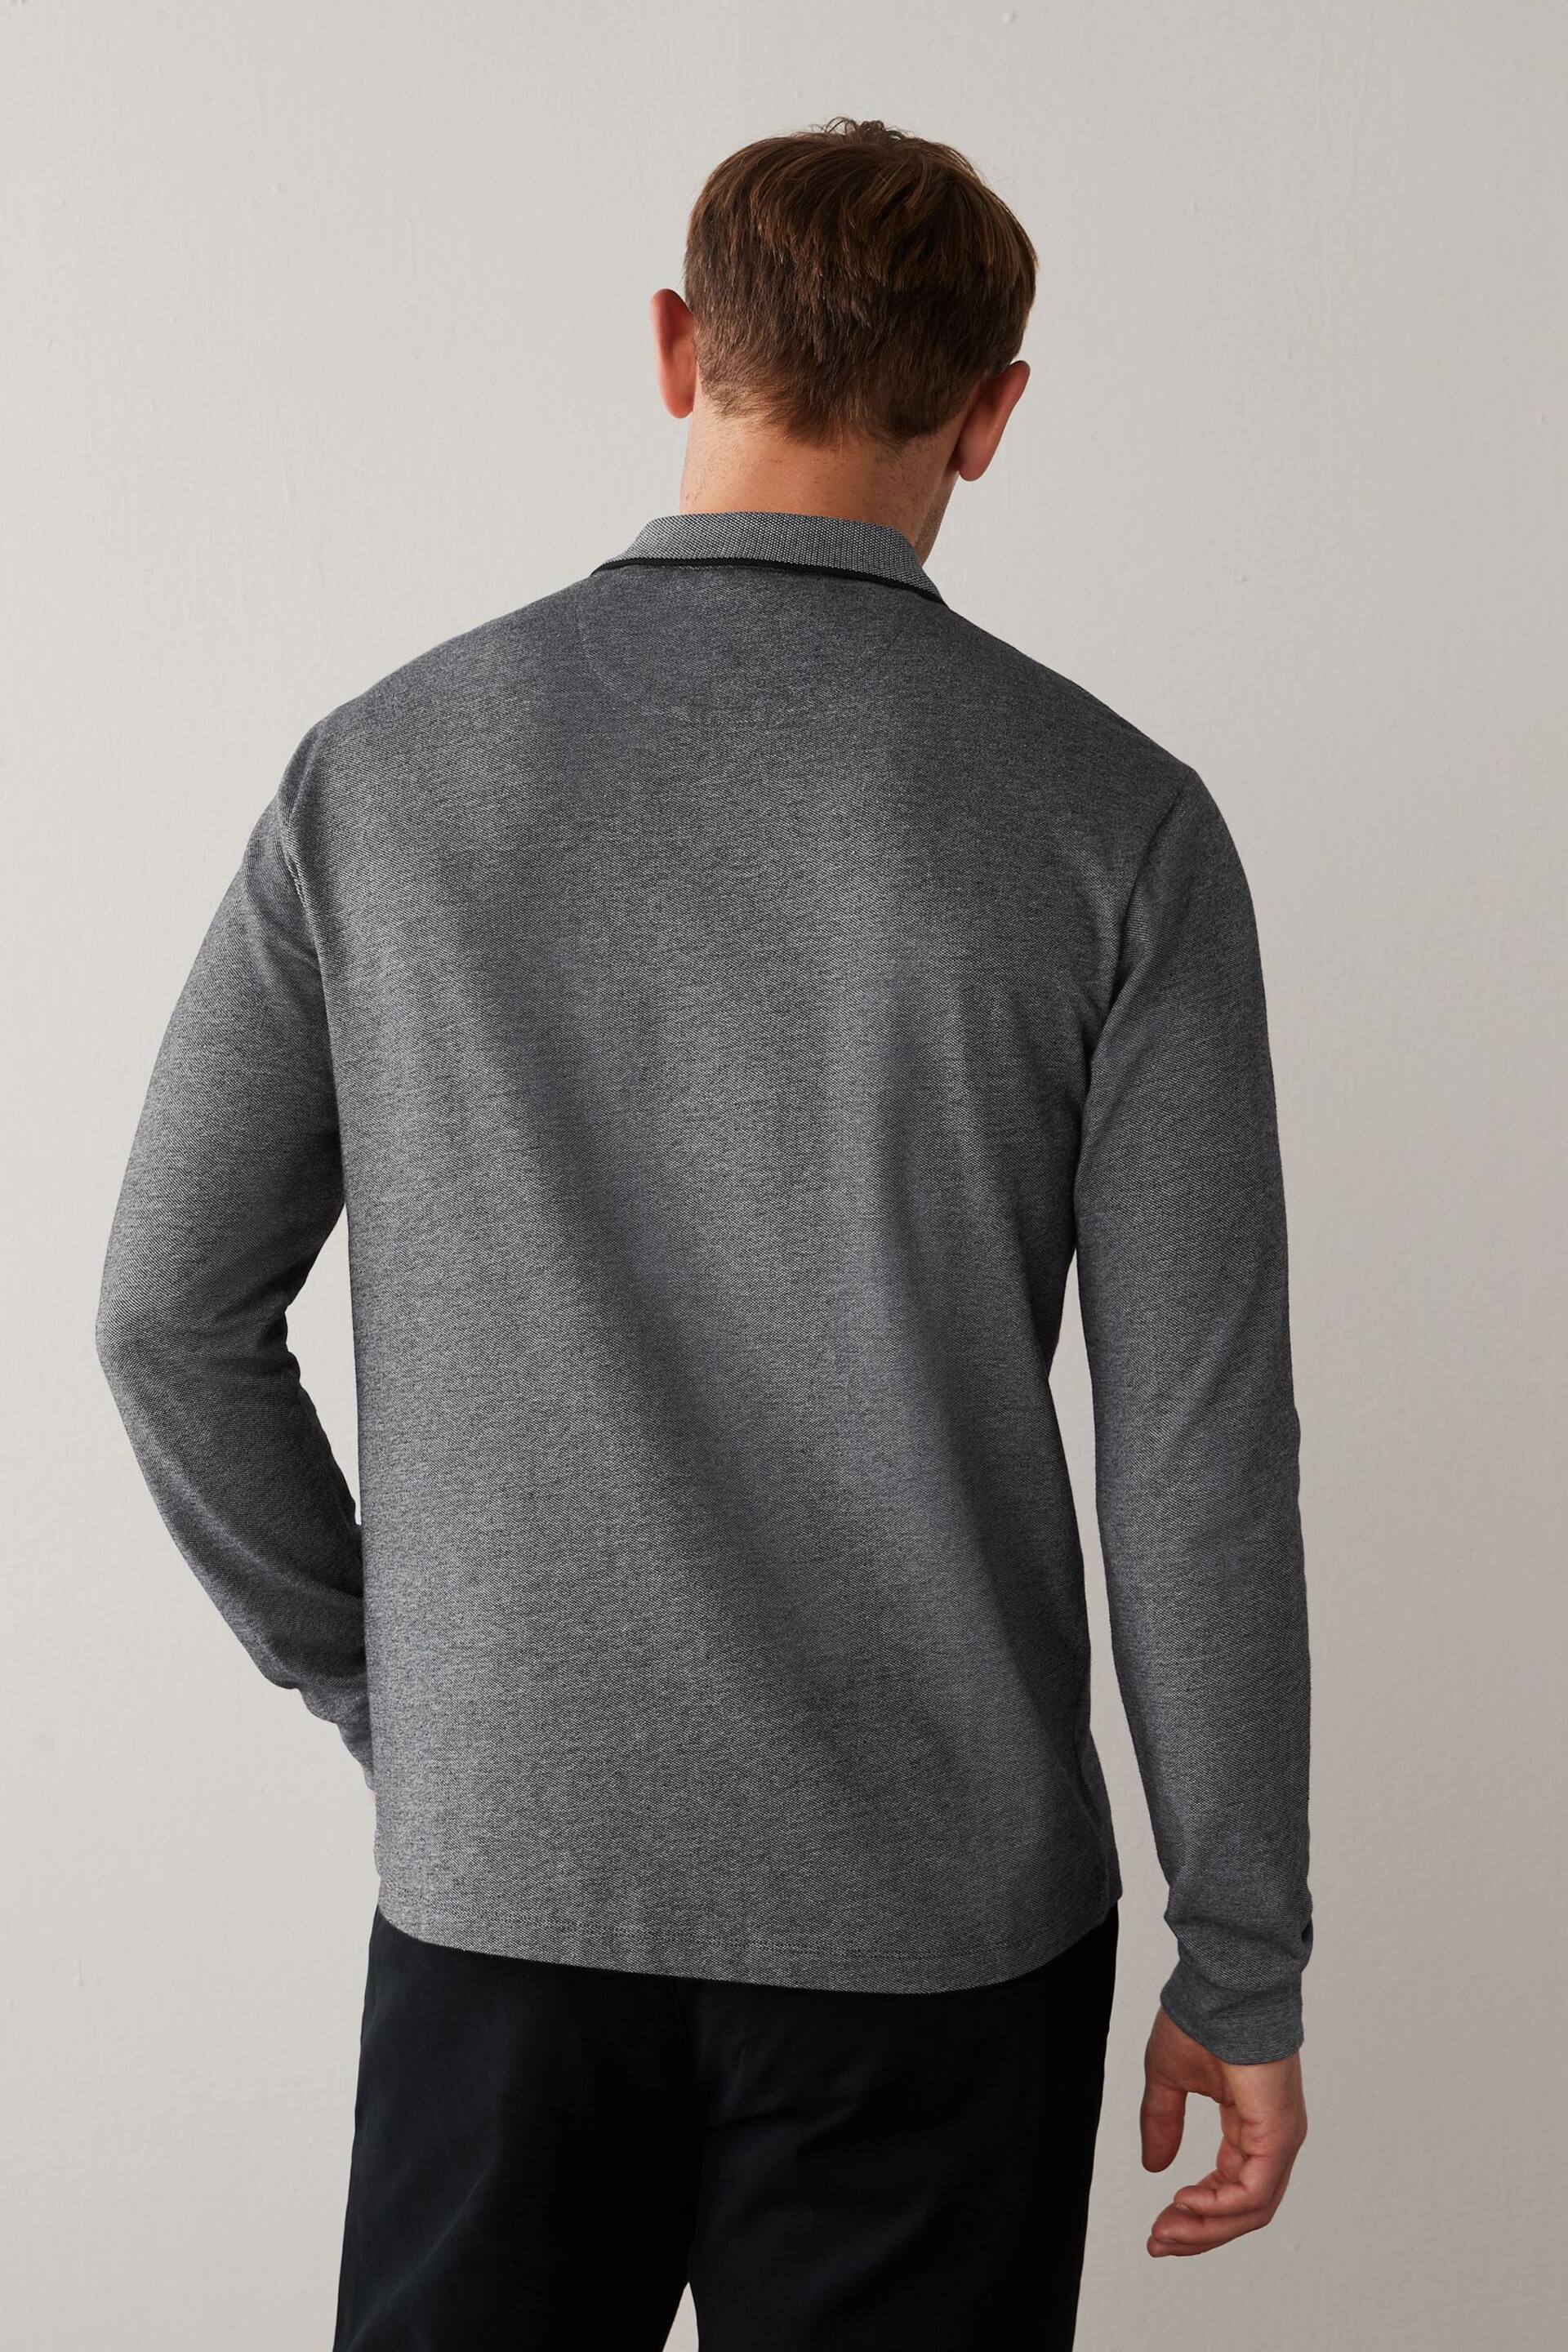 Charcoal Grey Oxford Long Sleeve Pique Polo Shirt - Image 3 of 5